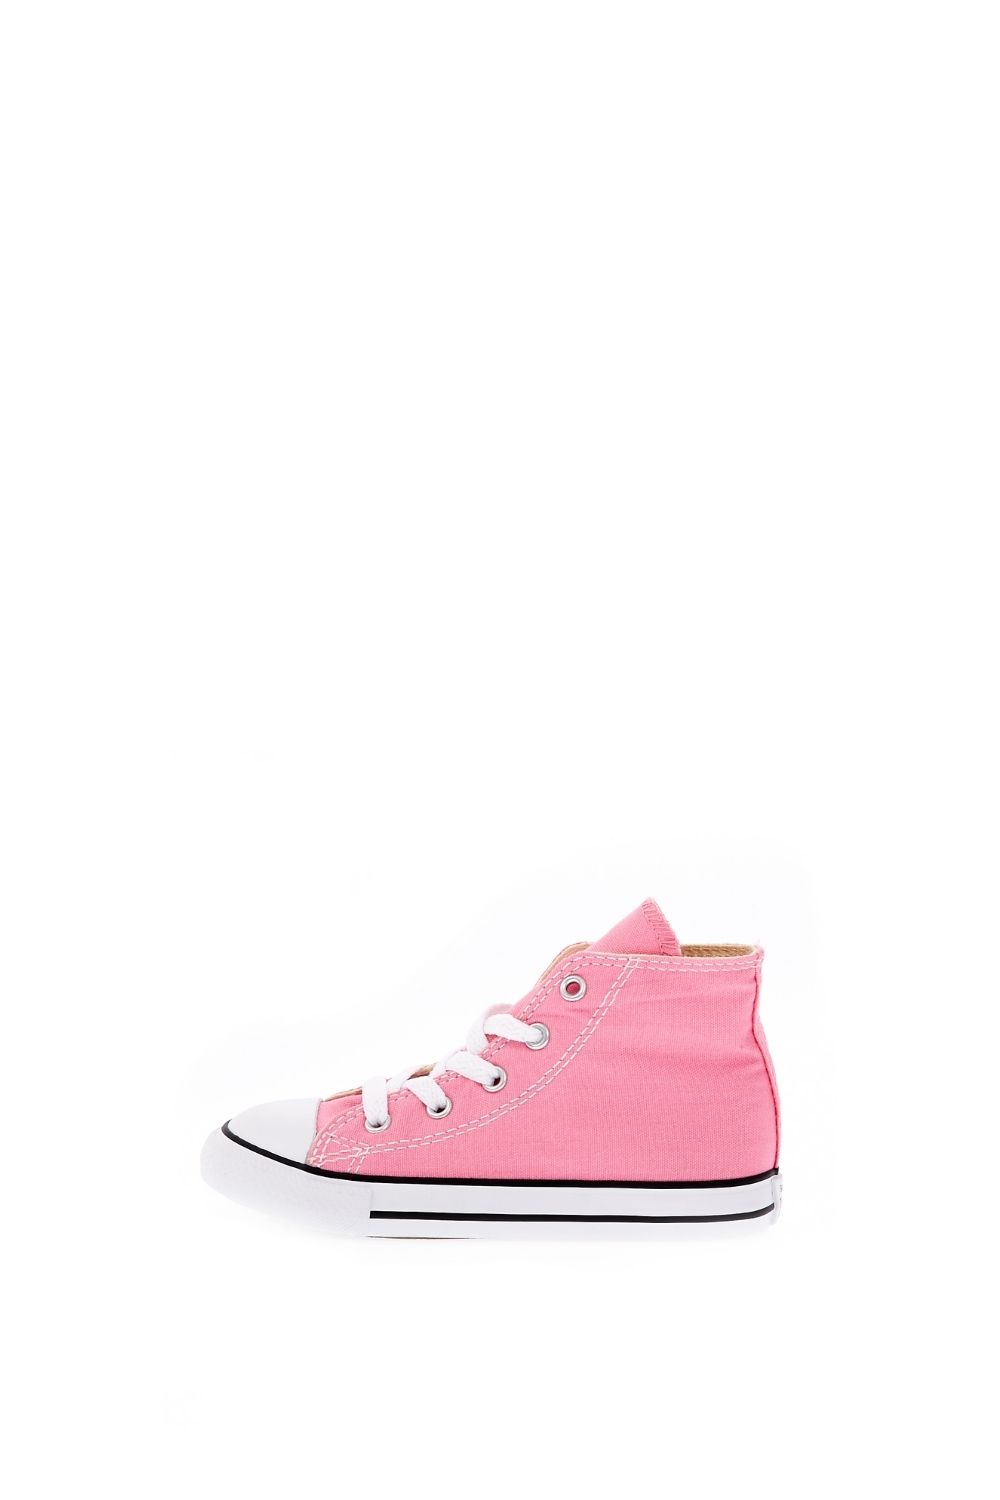 CONVERSE - Βρεφικά μποτάκια Chuck Taylor All Star Hi ροζ Παιδικά/Baby/Παπούτσια/Sneakers